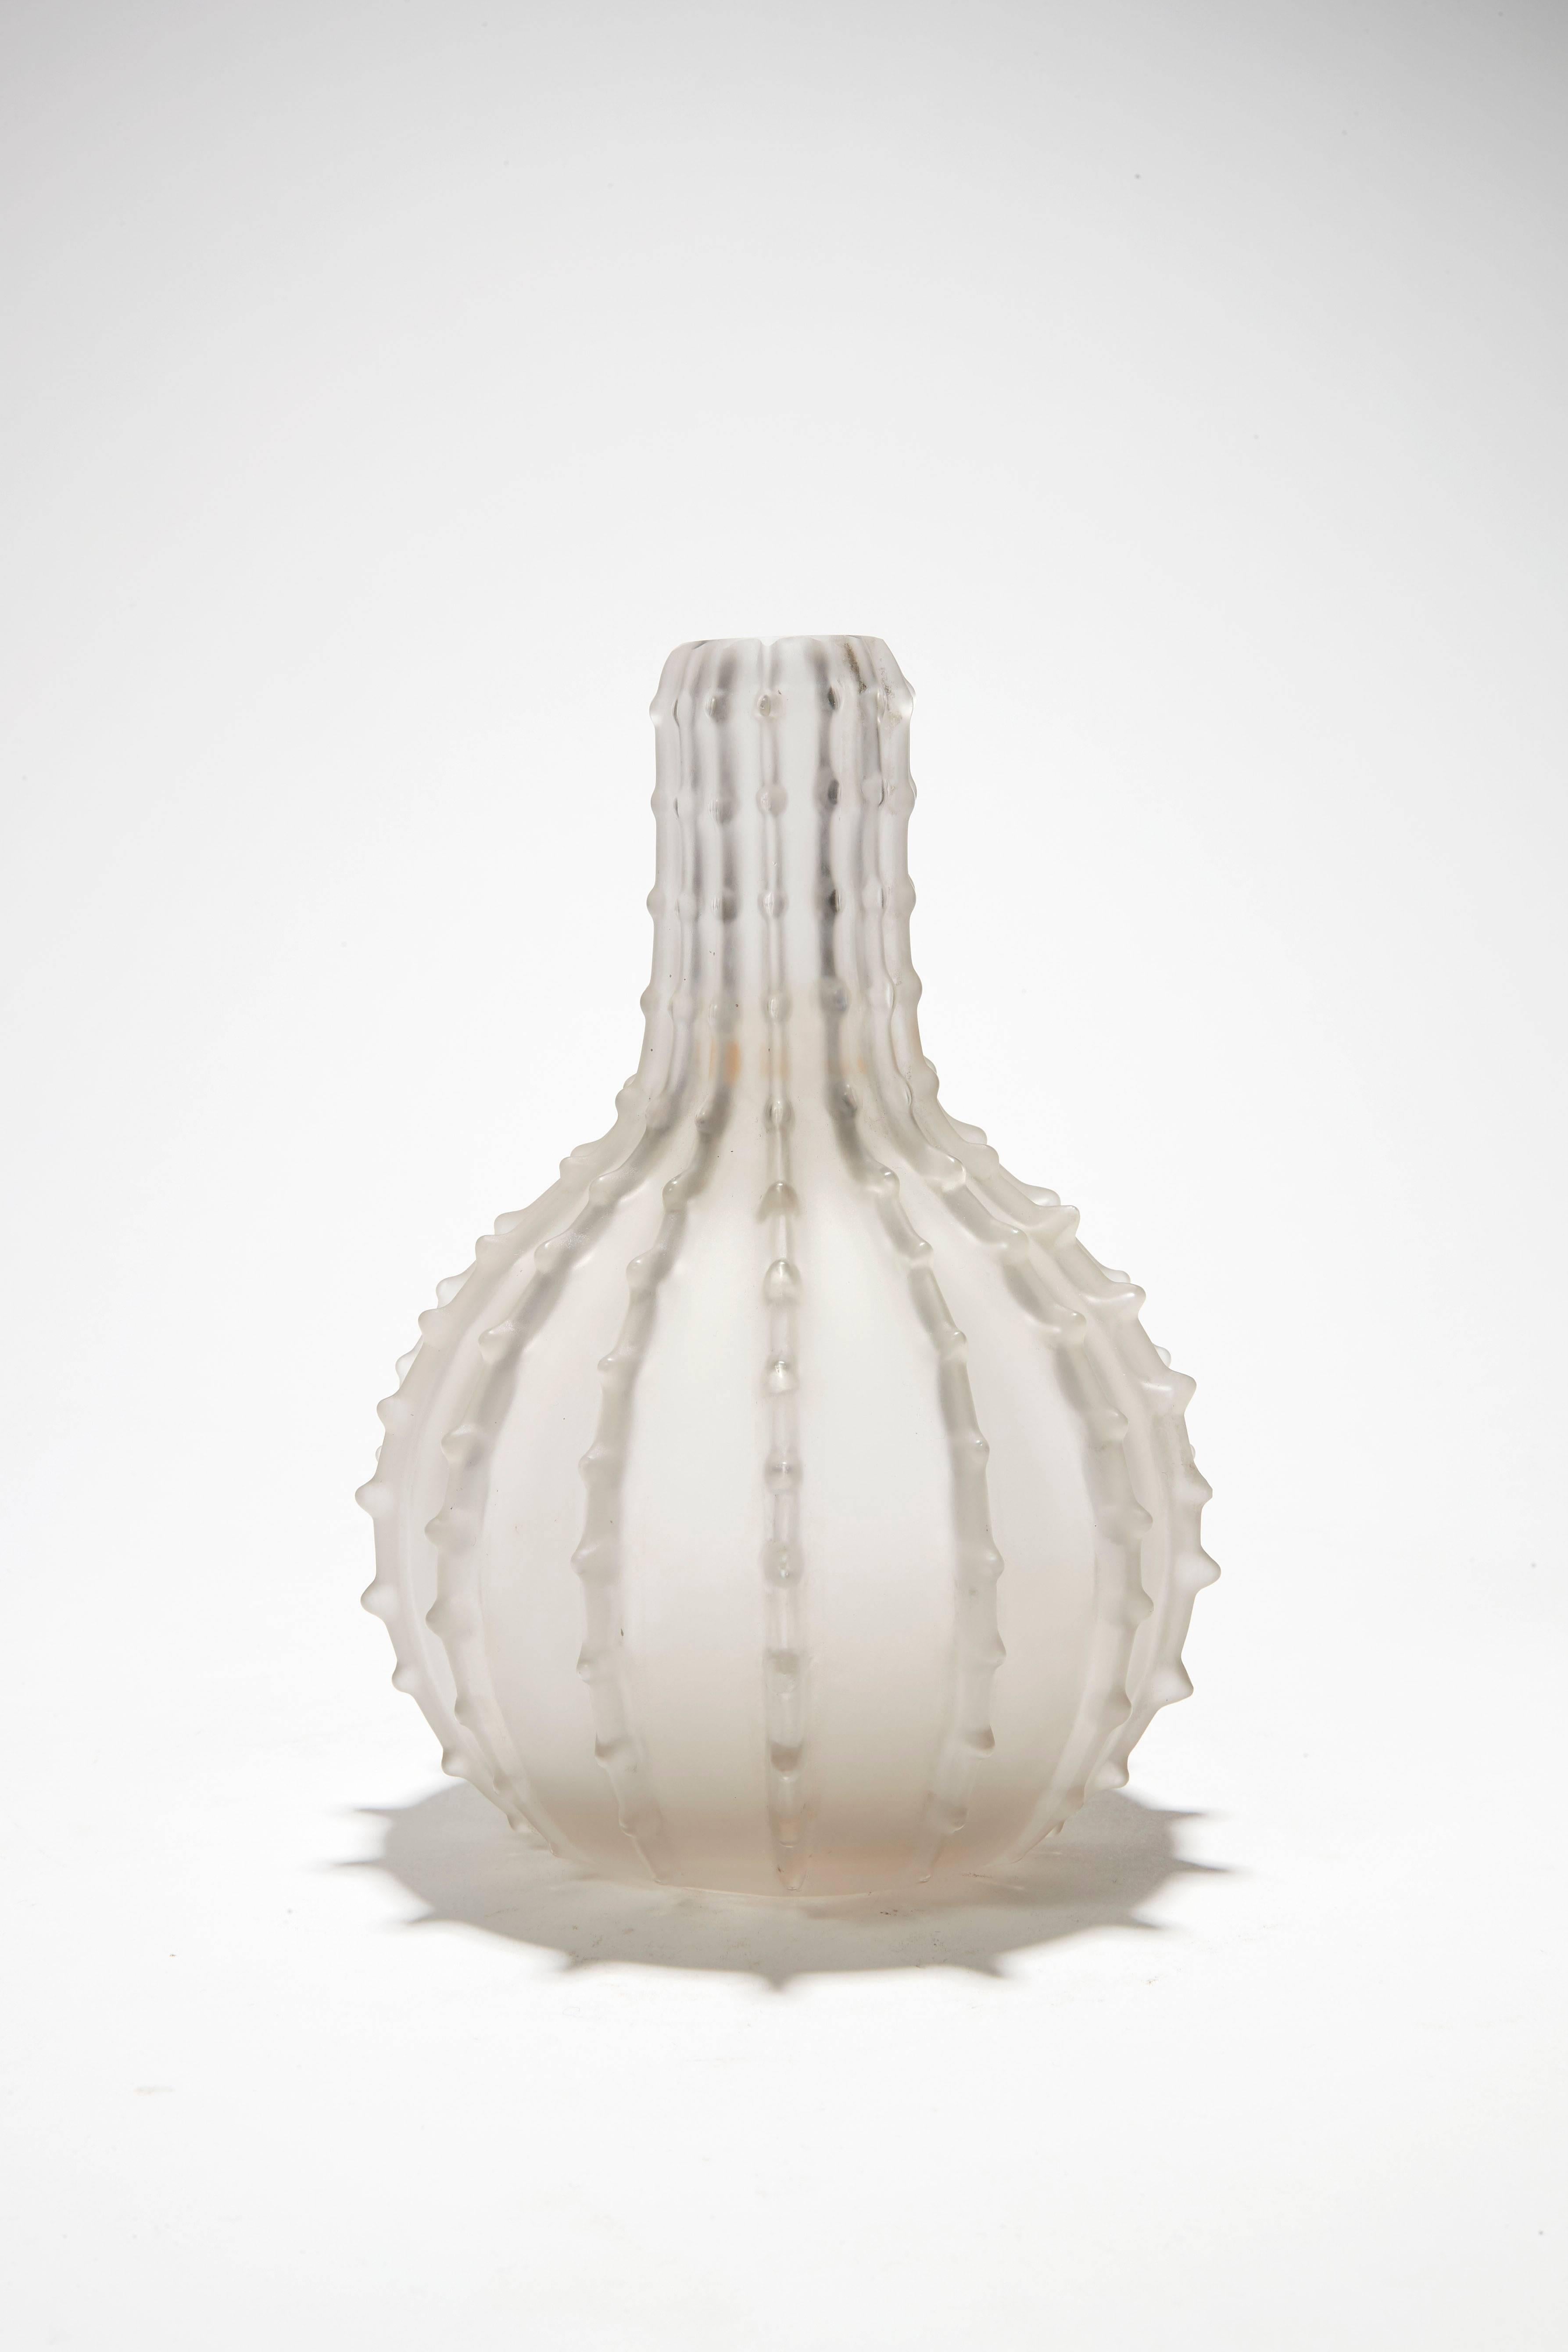 A circular-shaped "Dentelé" vase with a high neck, in white blown and moulded satined glass. The decor made up with vertical serrated lines. Signed.

Origin:
Private collection, Italia.

History:
The model created in 1912, in the